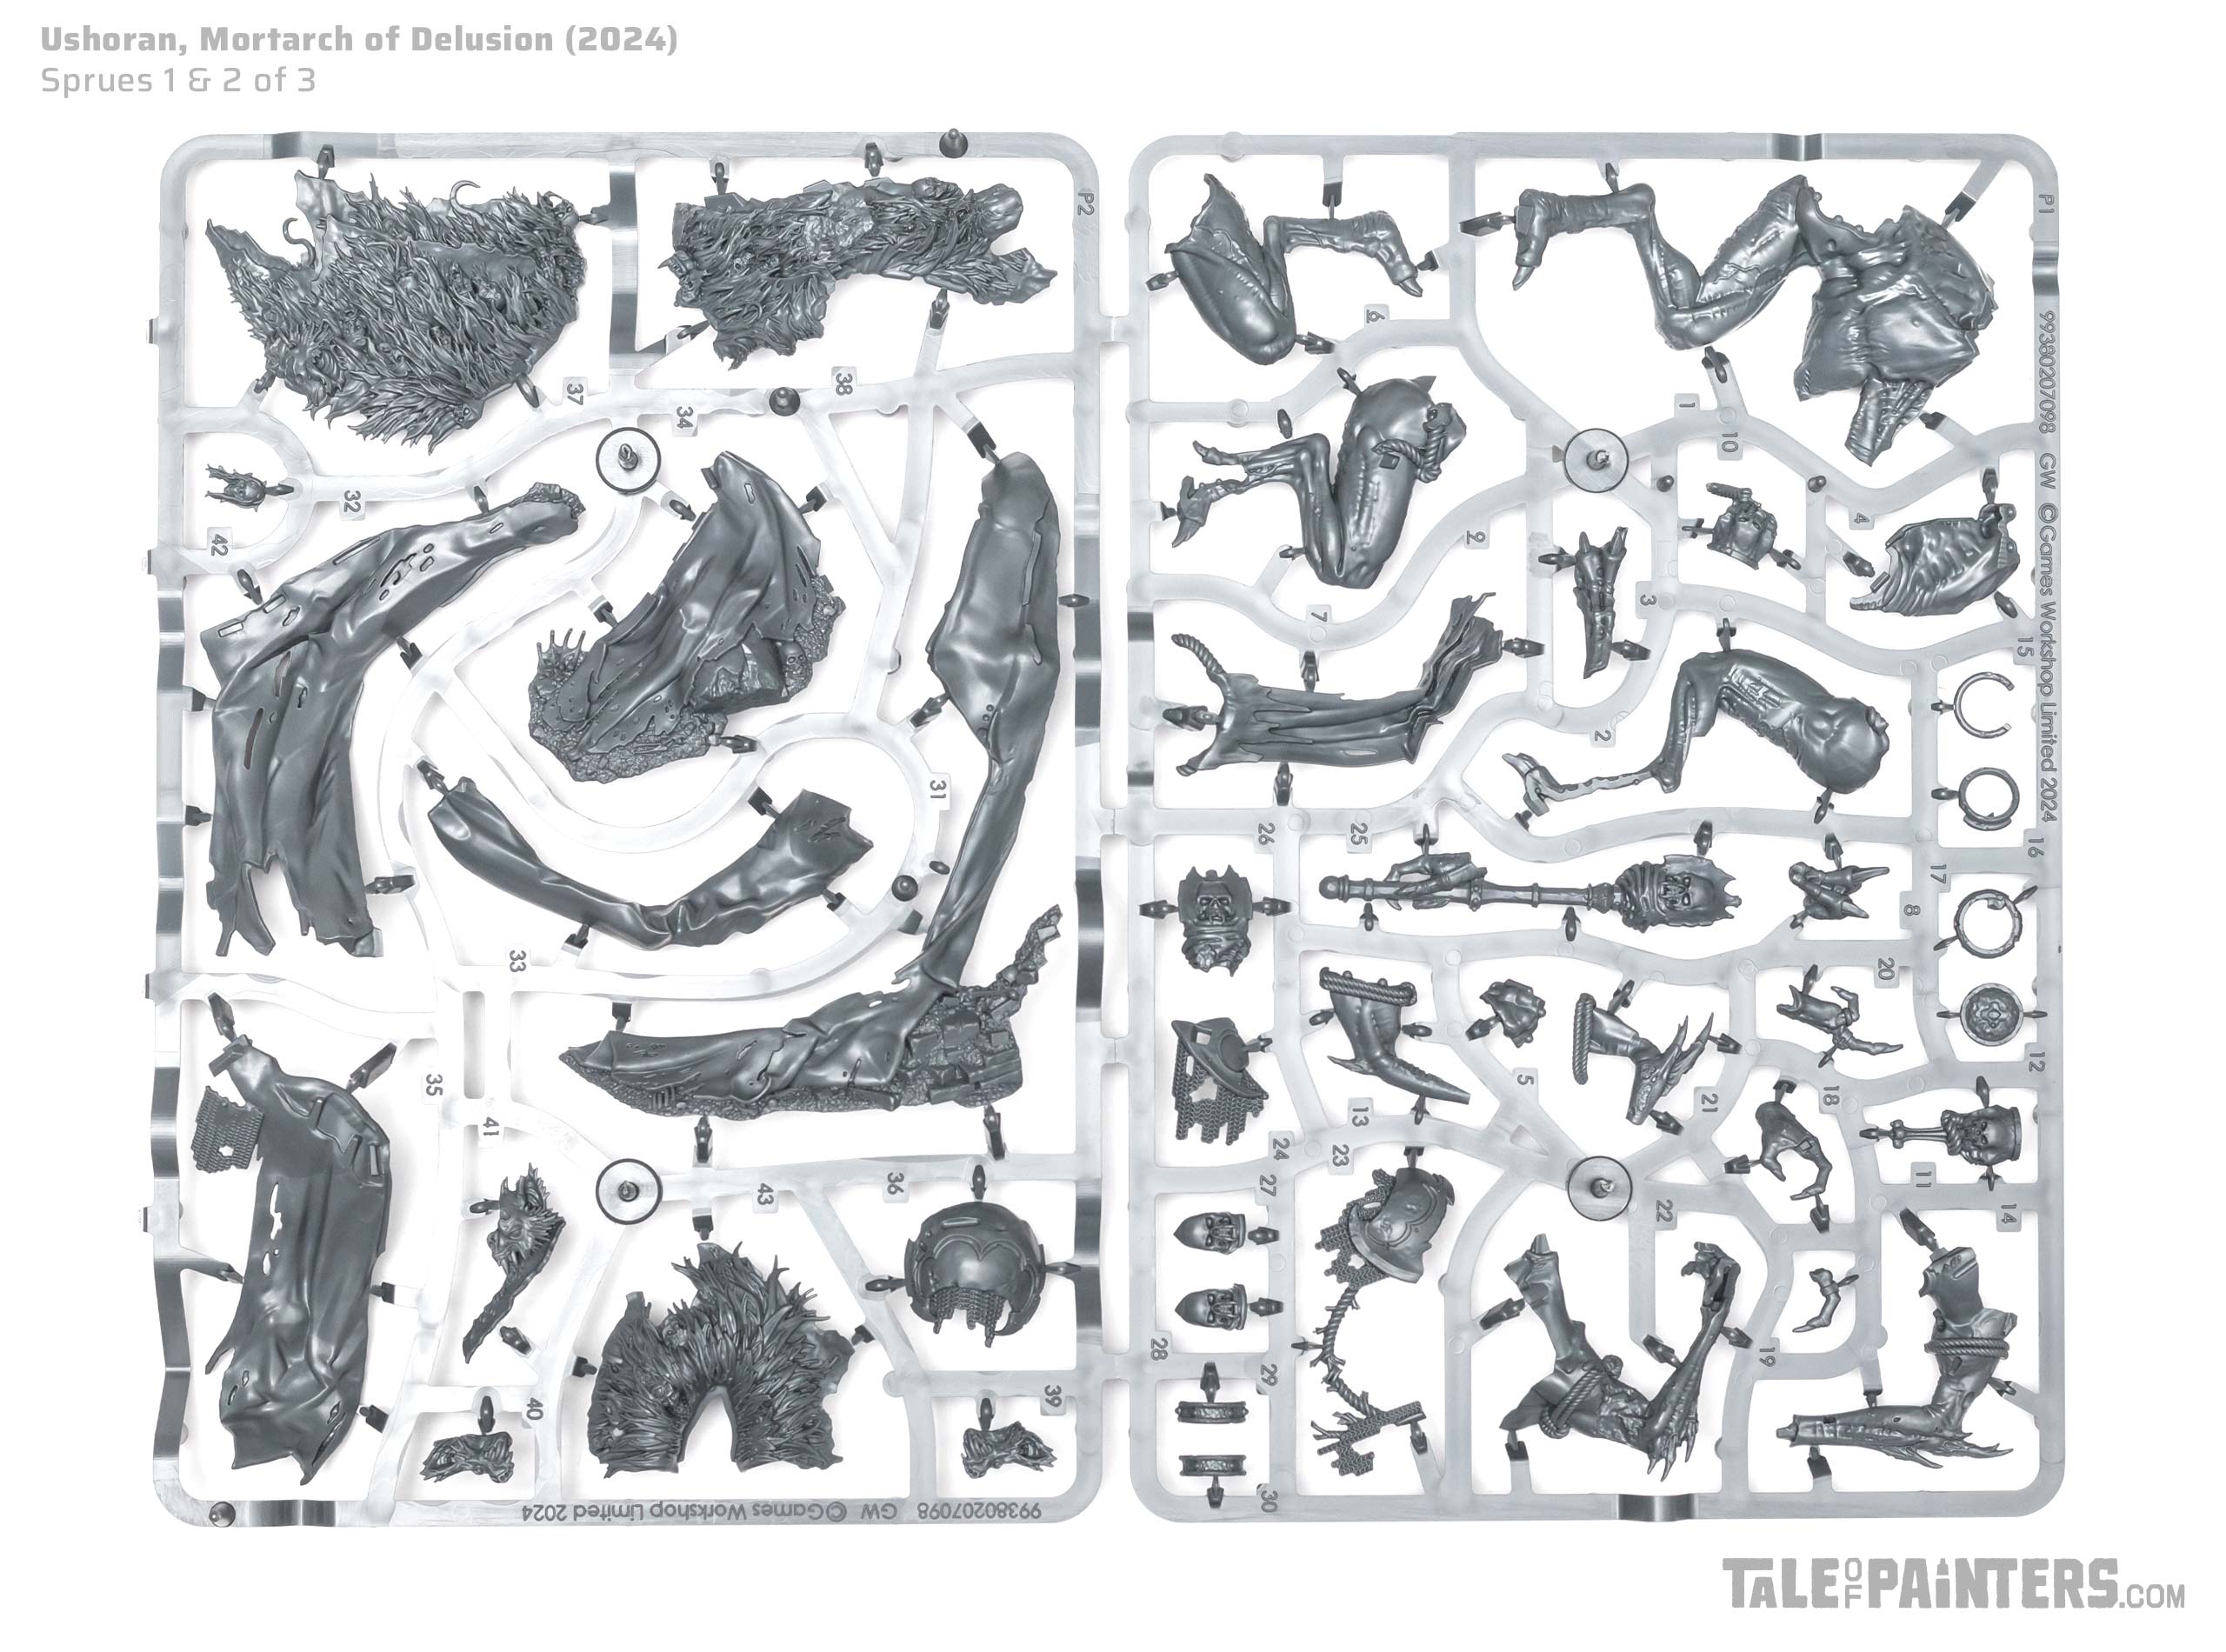 Flesh-eater Courts Ushoran Mortarch of Delusion sprues 1 and 2 of 3